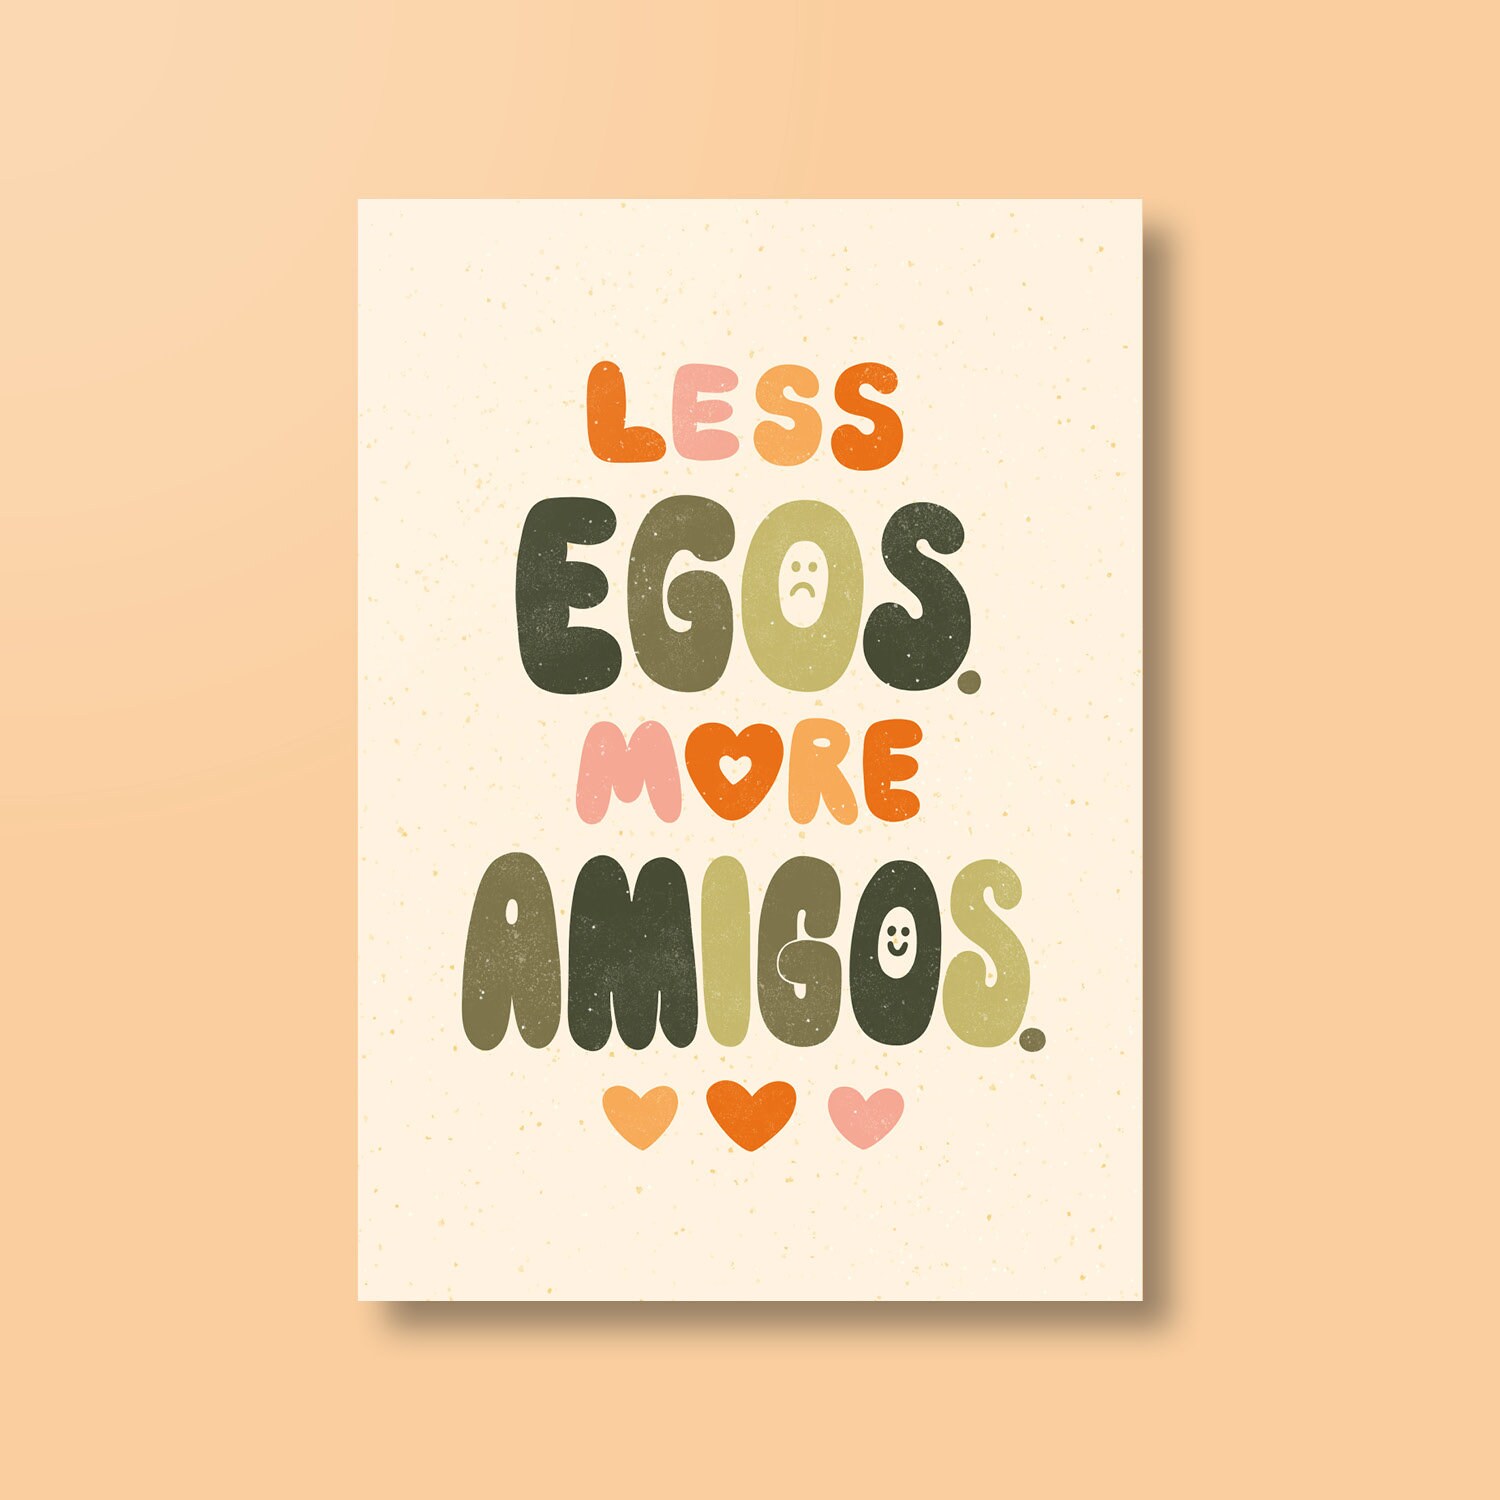 Friends gift design with Less egos more amigos quote